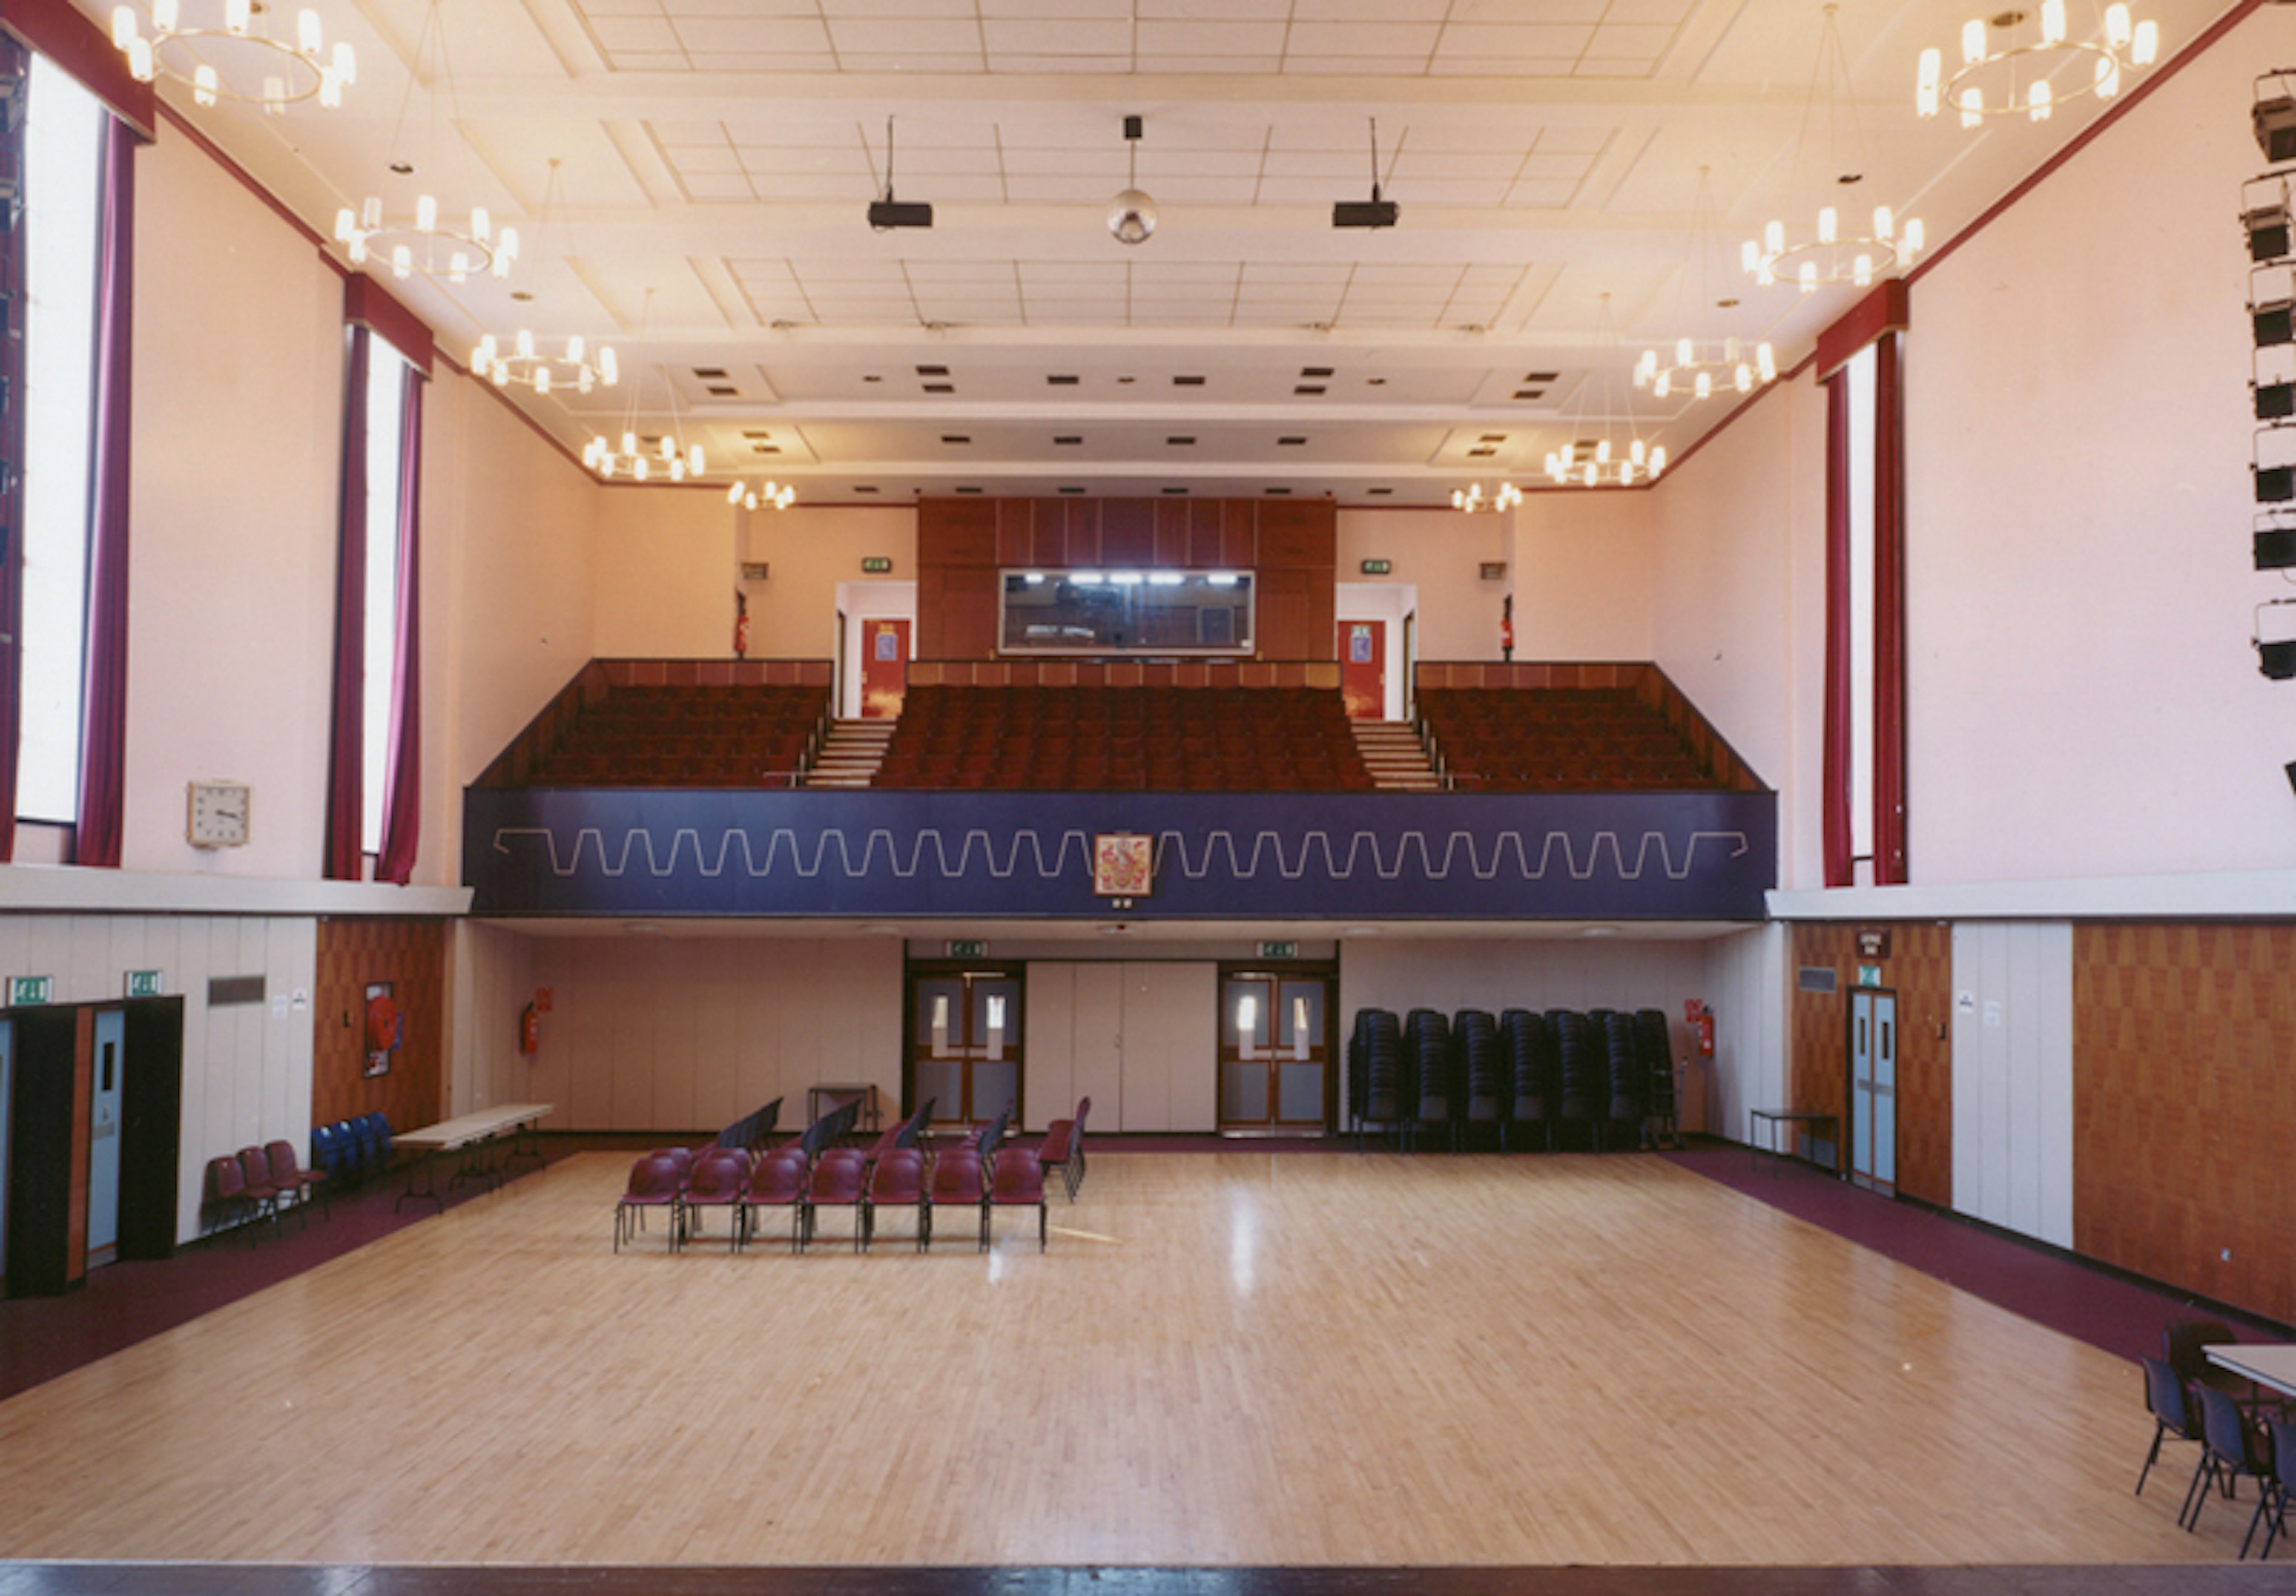 Business - Brierley Hill Civic Hall